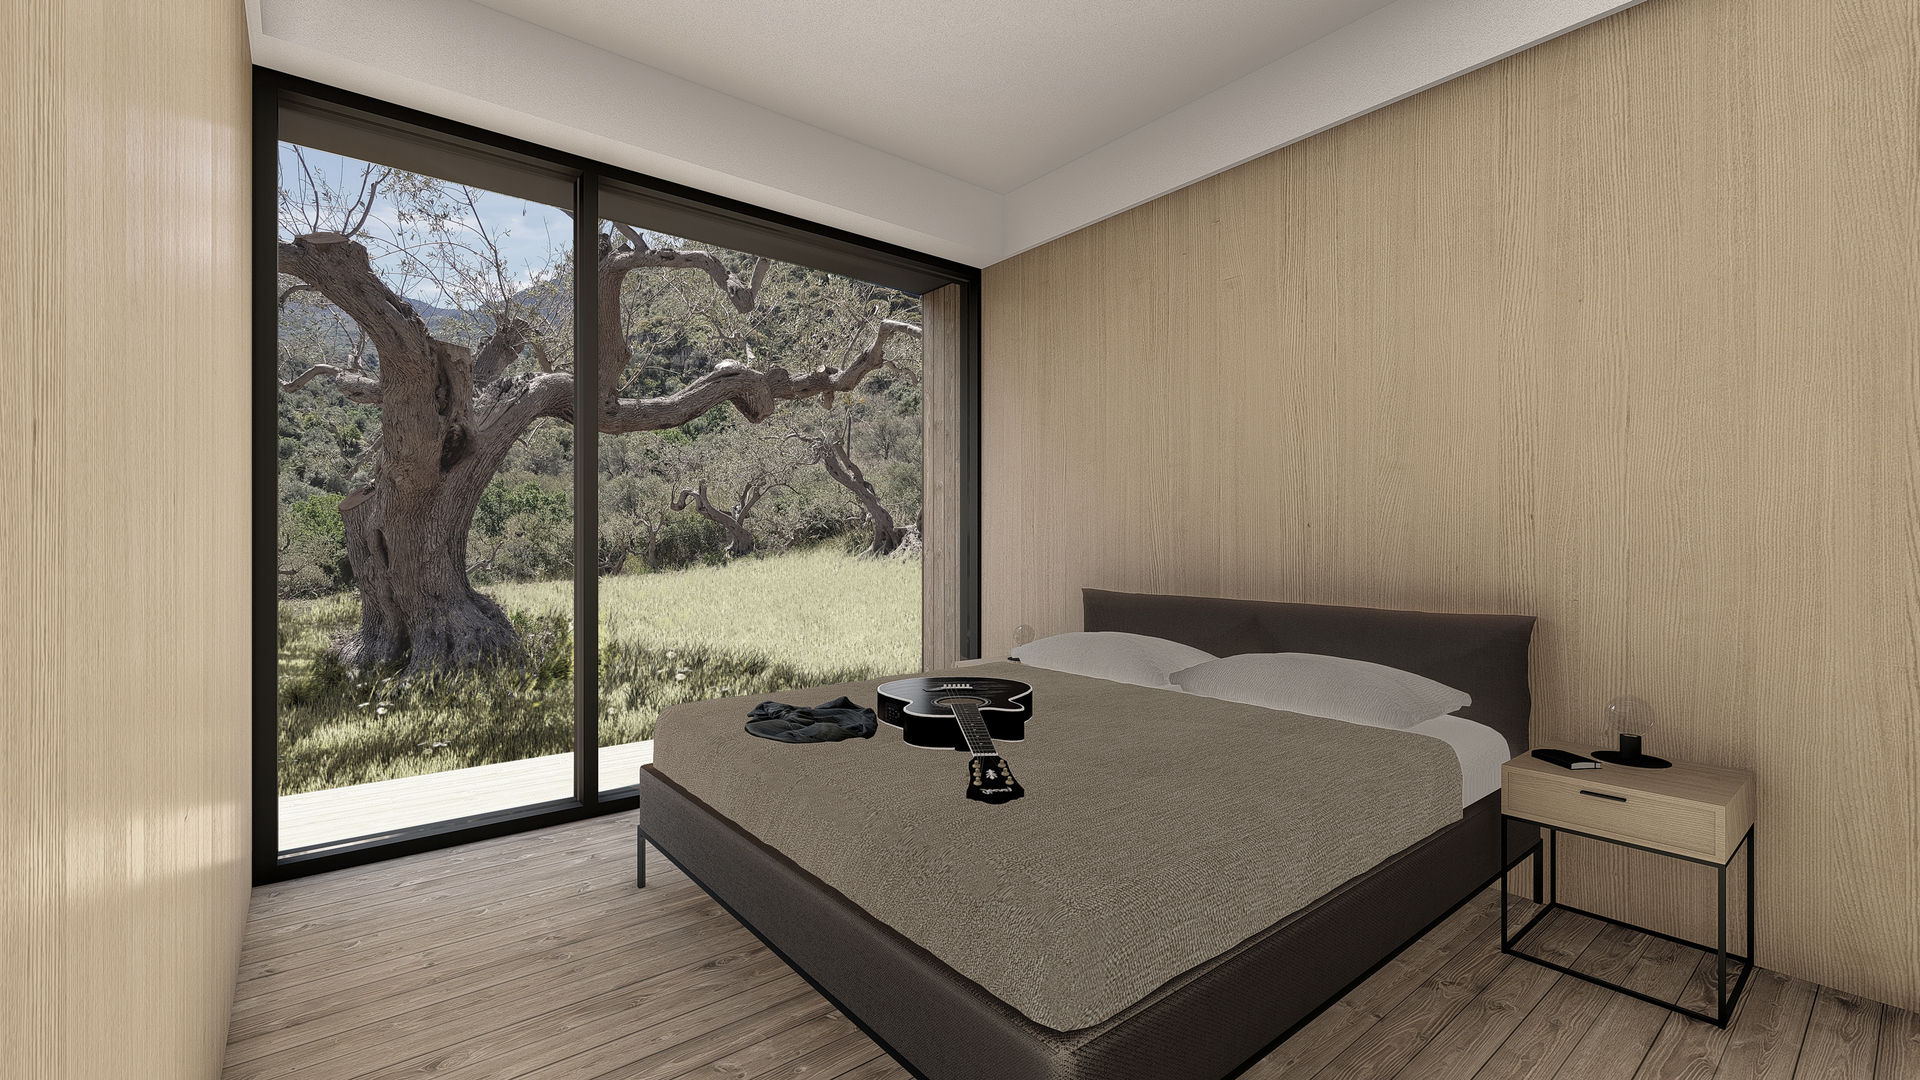 WOODEN HOUSE G|C – SICILY, ALESSIO LO BELLO ARCHITETTO a Palermo ALESSIO LO BELLO ARCHITETTO a Palermo Moderne slaapkamers Hout Hout king-size bedroom, glass window, room with a view, queen-size bed, double room